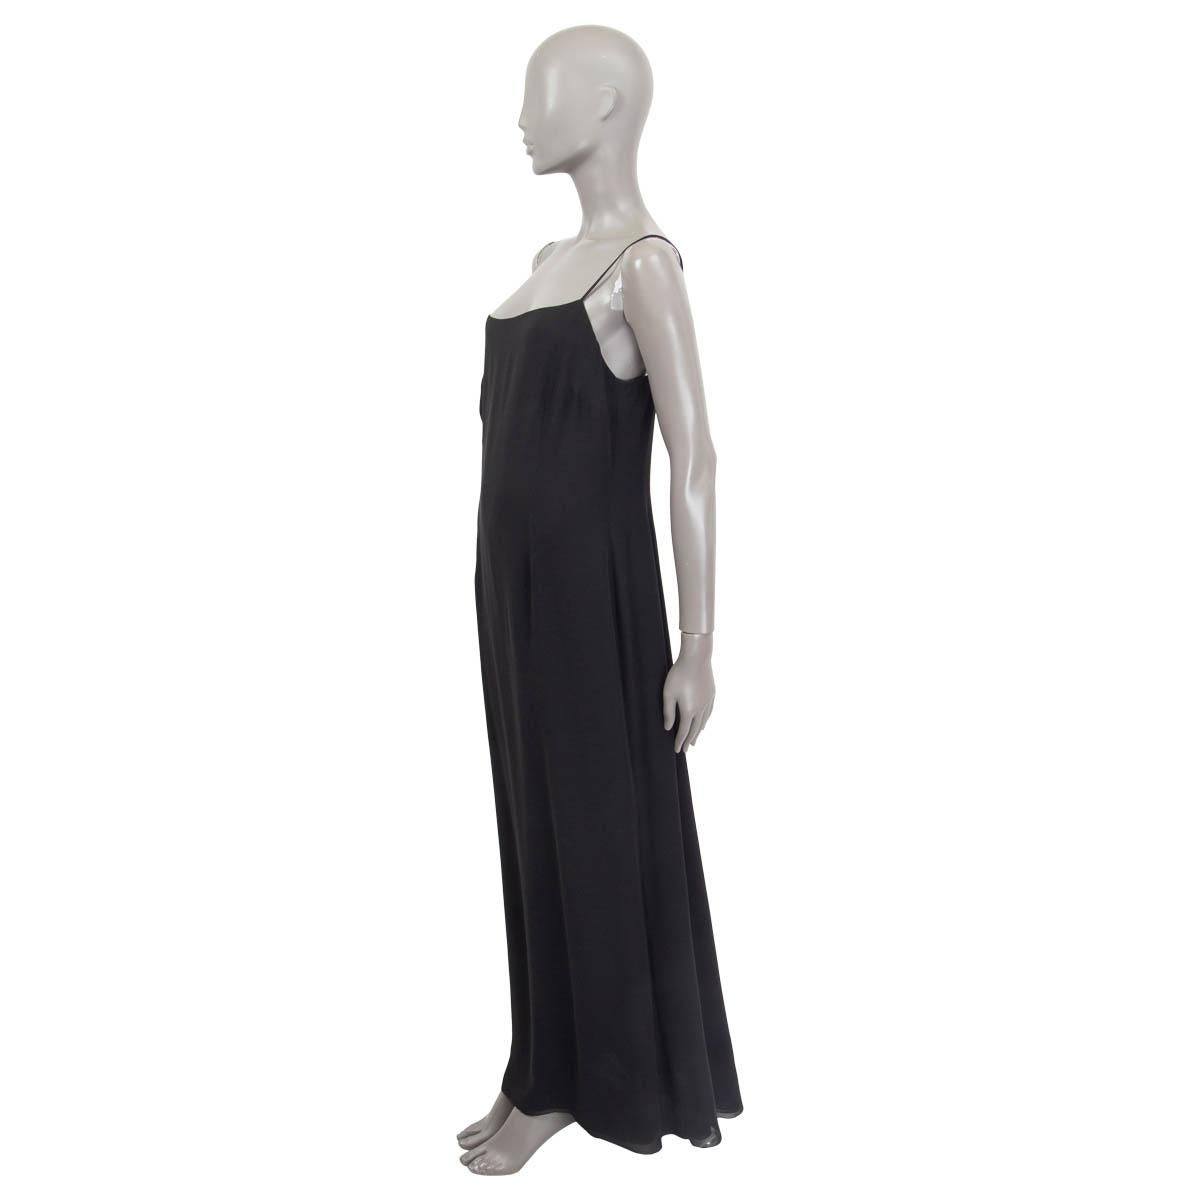 100% authentic Akris sleeveless evening dress in black silk (100%). Opens with a concealed zipper and a hook on the back. Lined in black silk (100%). Has a drawn thread at the bottom of the dress, otherwise in excellent condition. 

Measurements
Tag